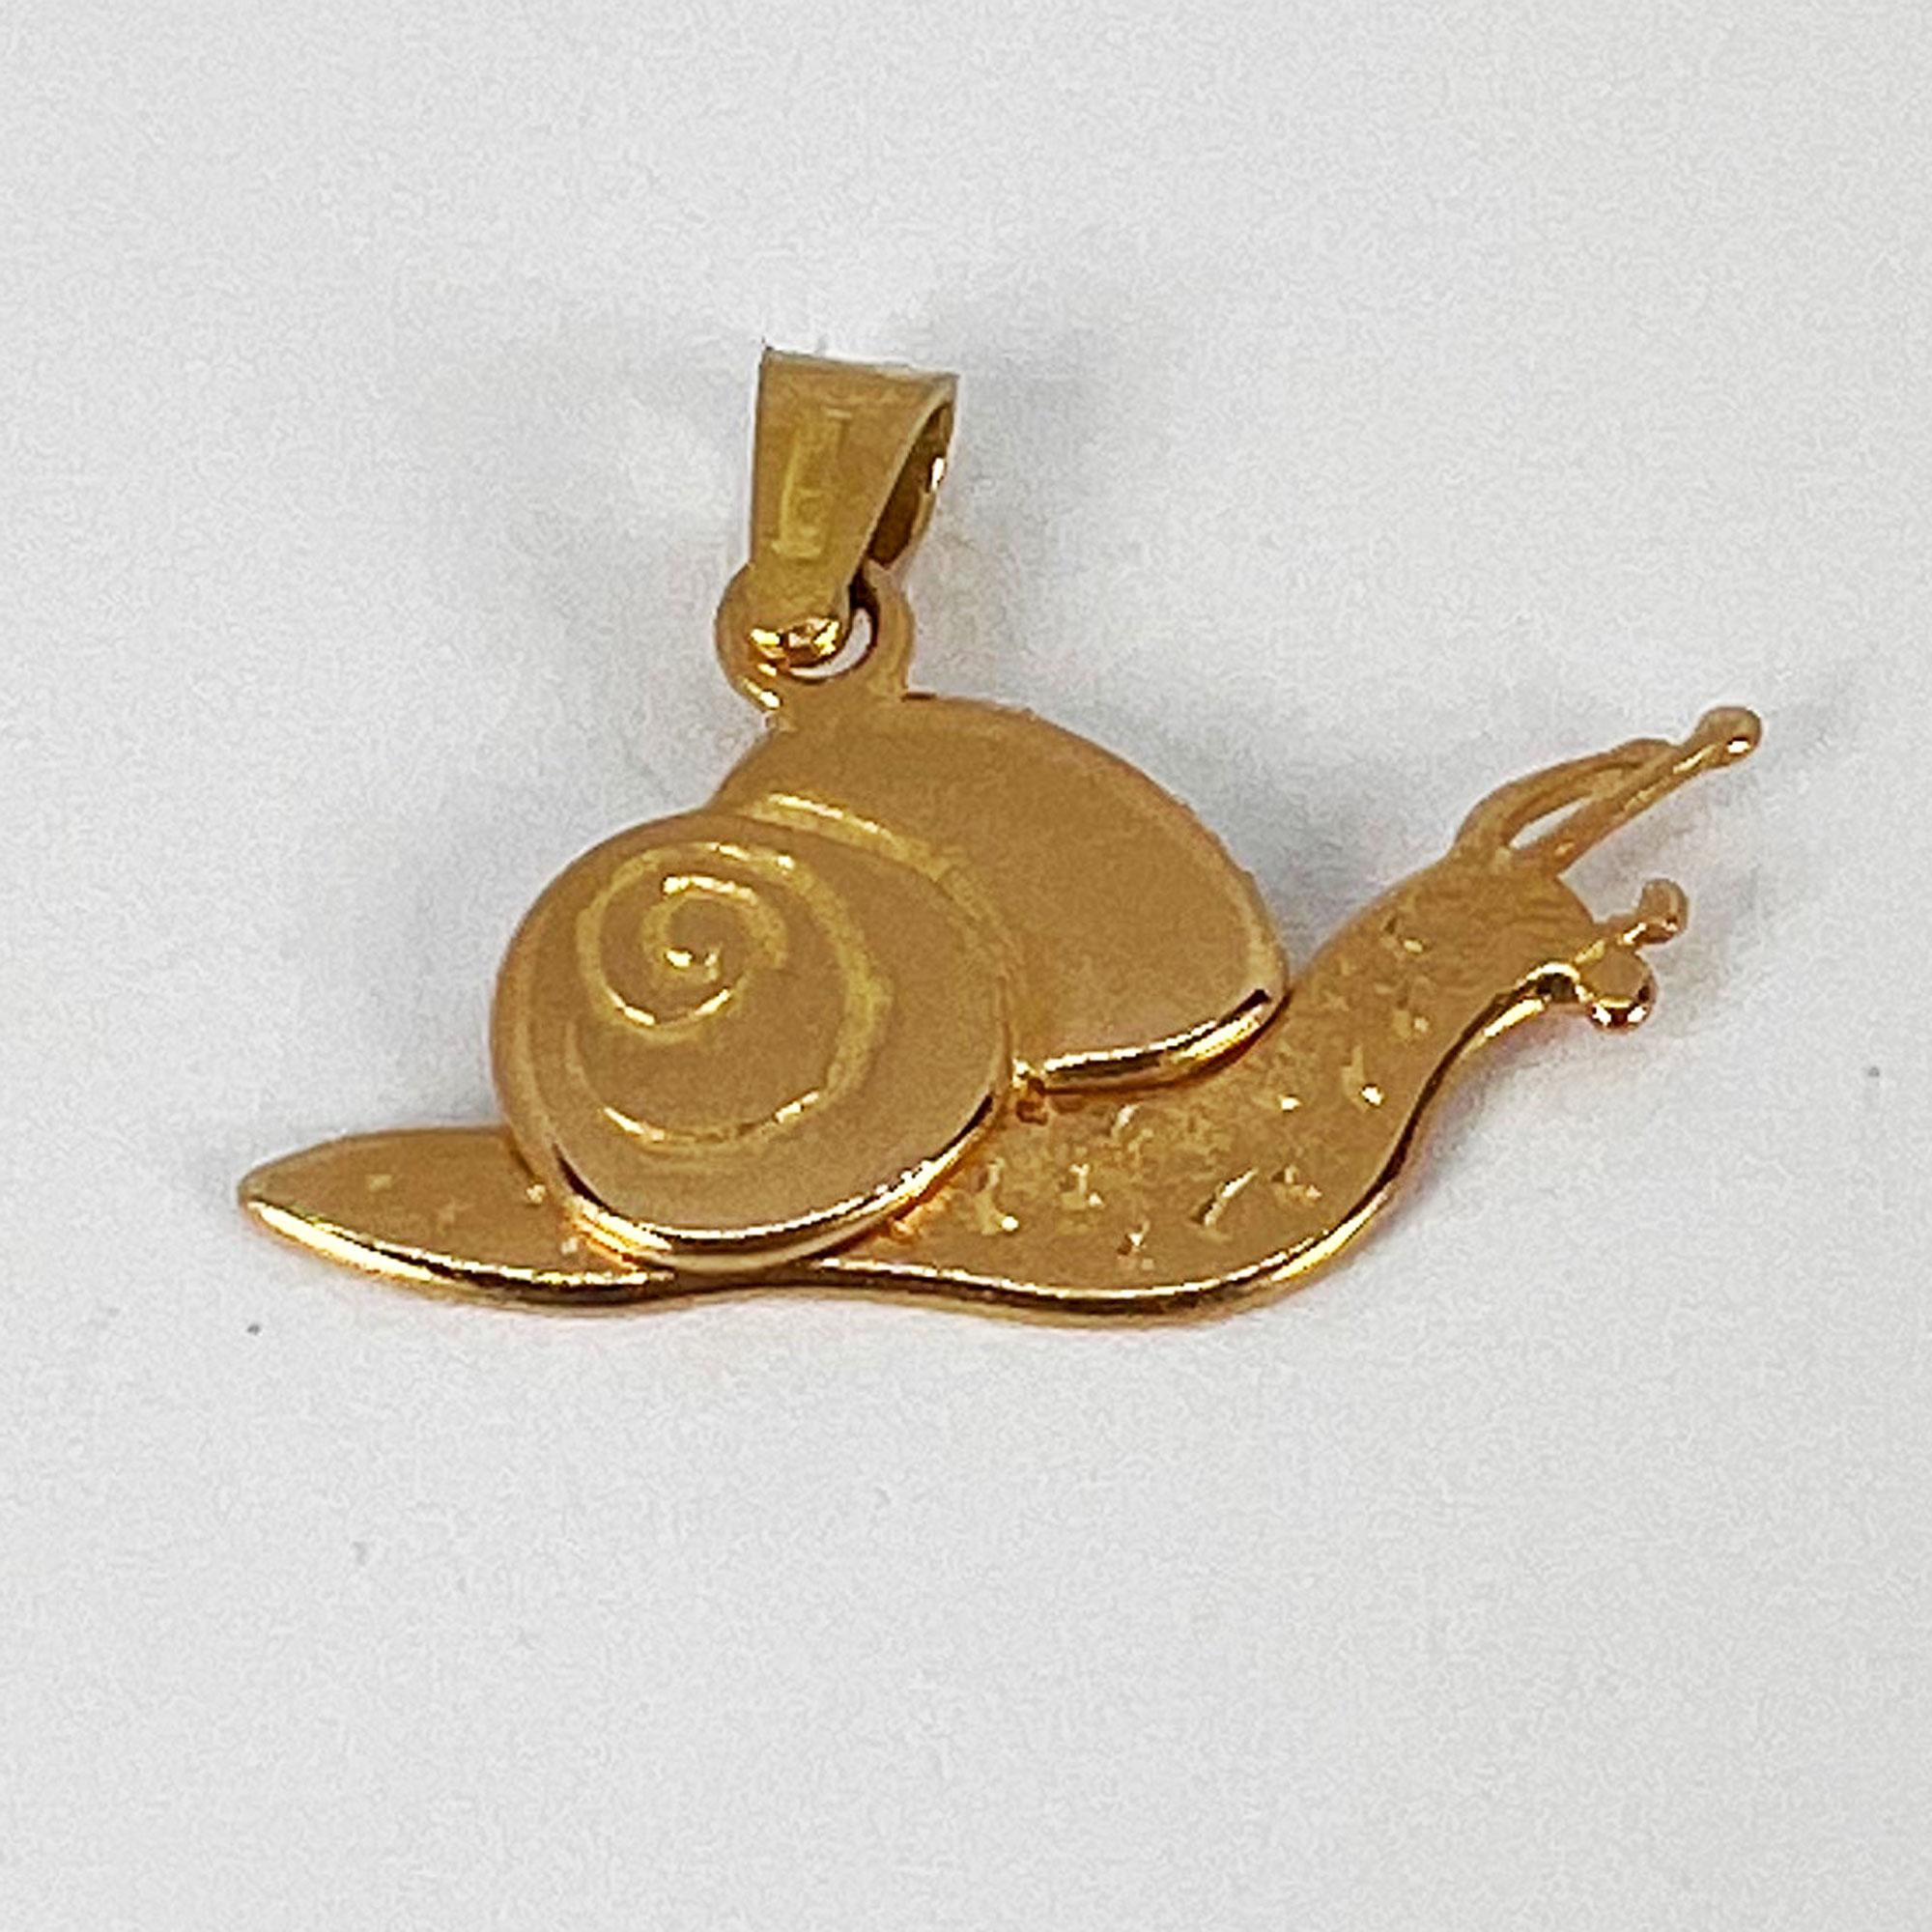 Articulated Snail 18K Yellow Gold Charm Pendant 5